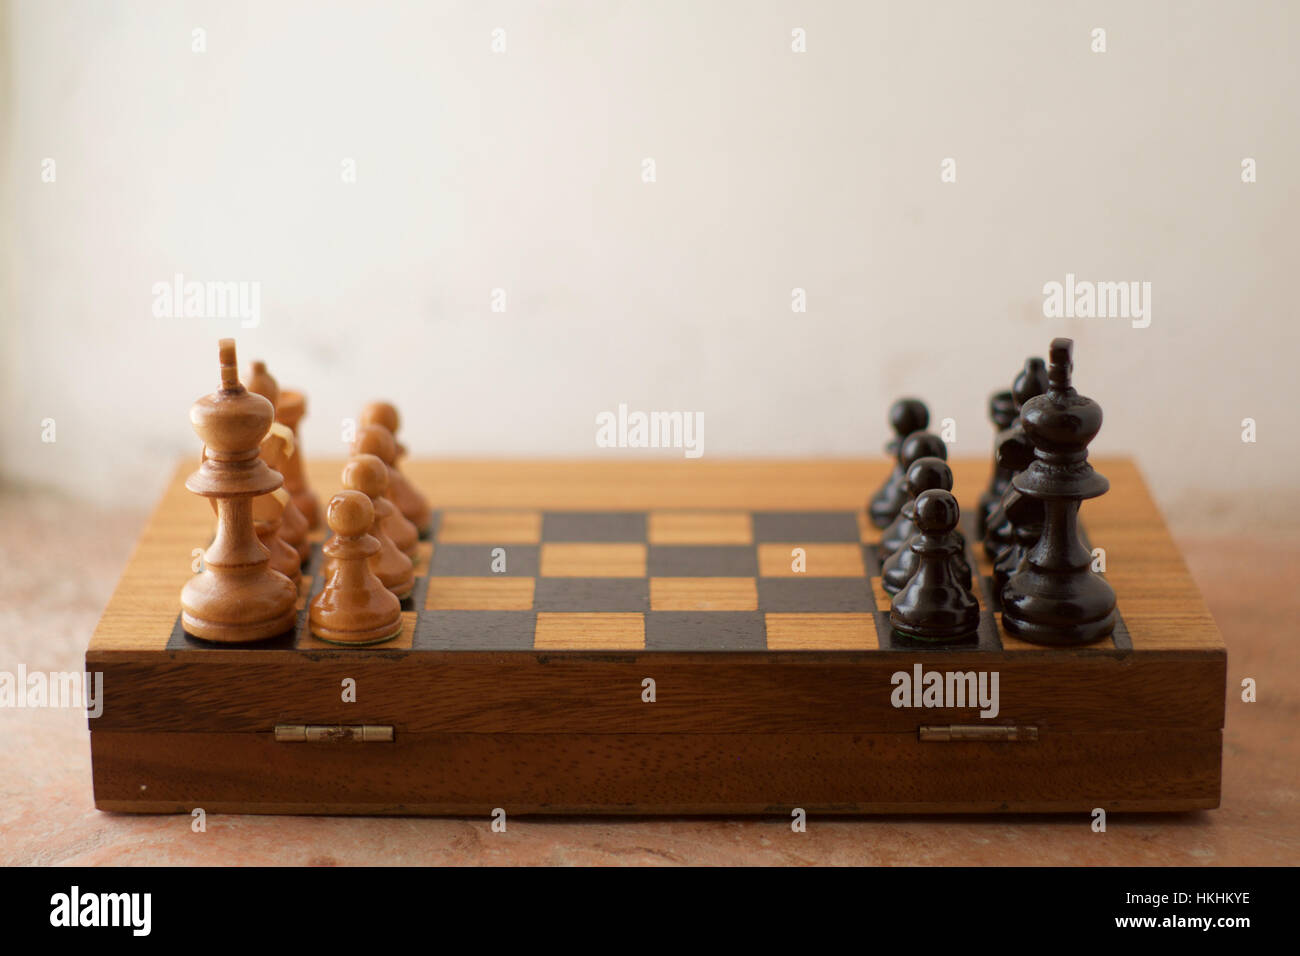 A half chess board with black and white chess pieces arranged facing eachother Stock Photo